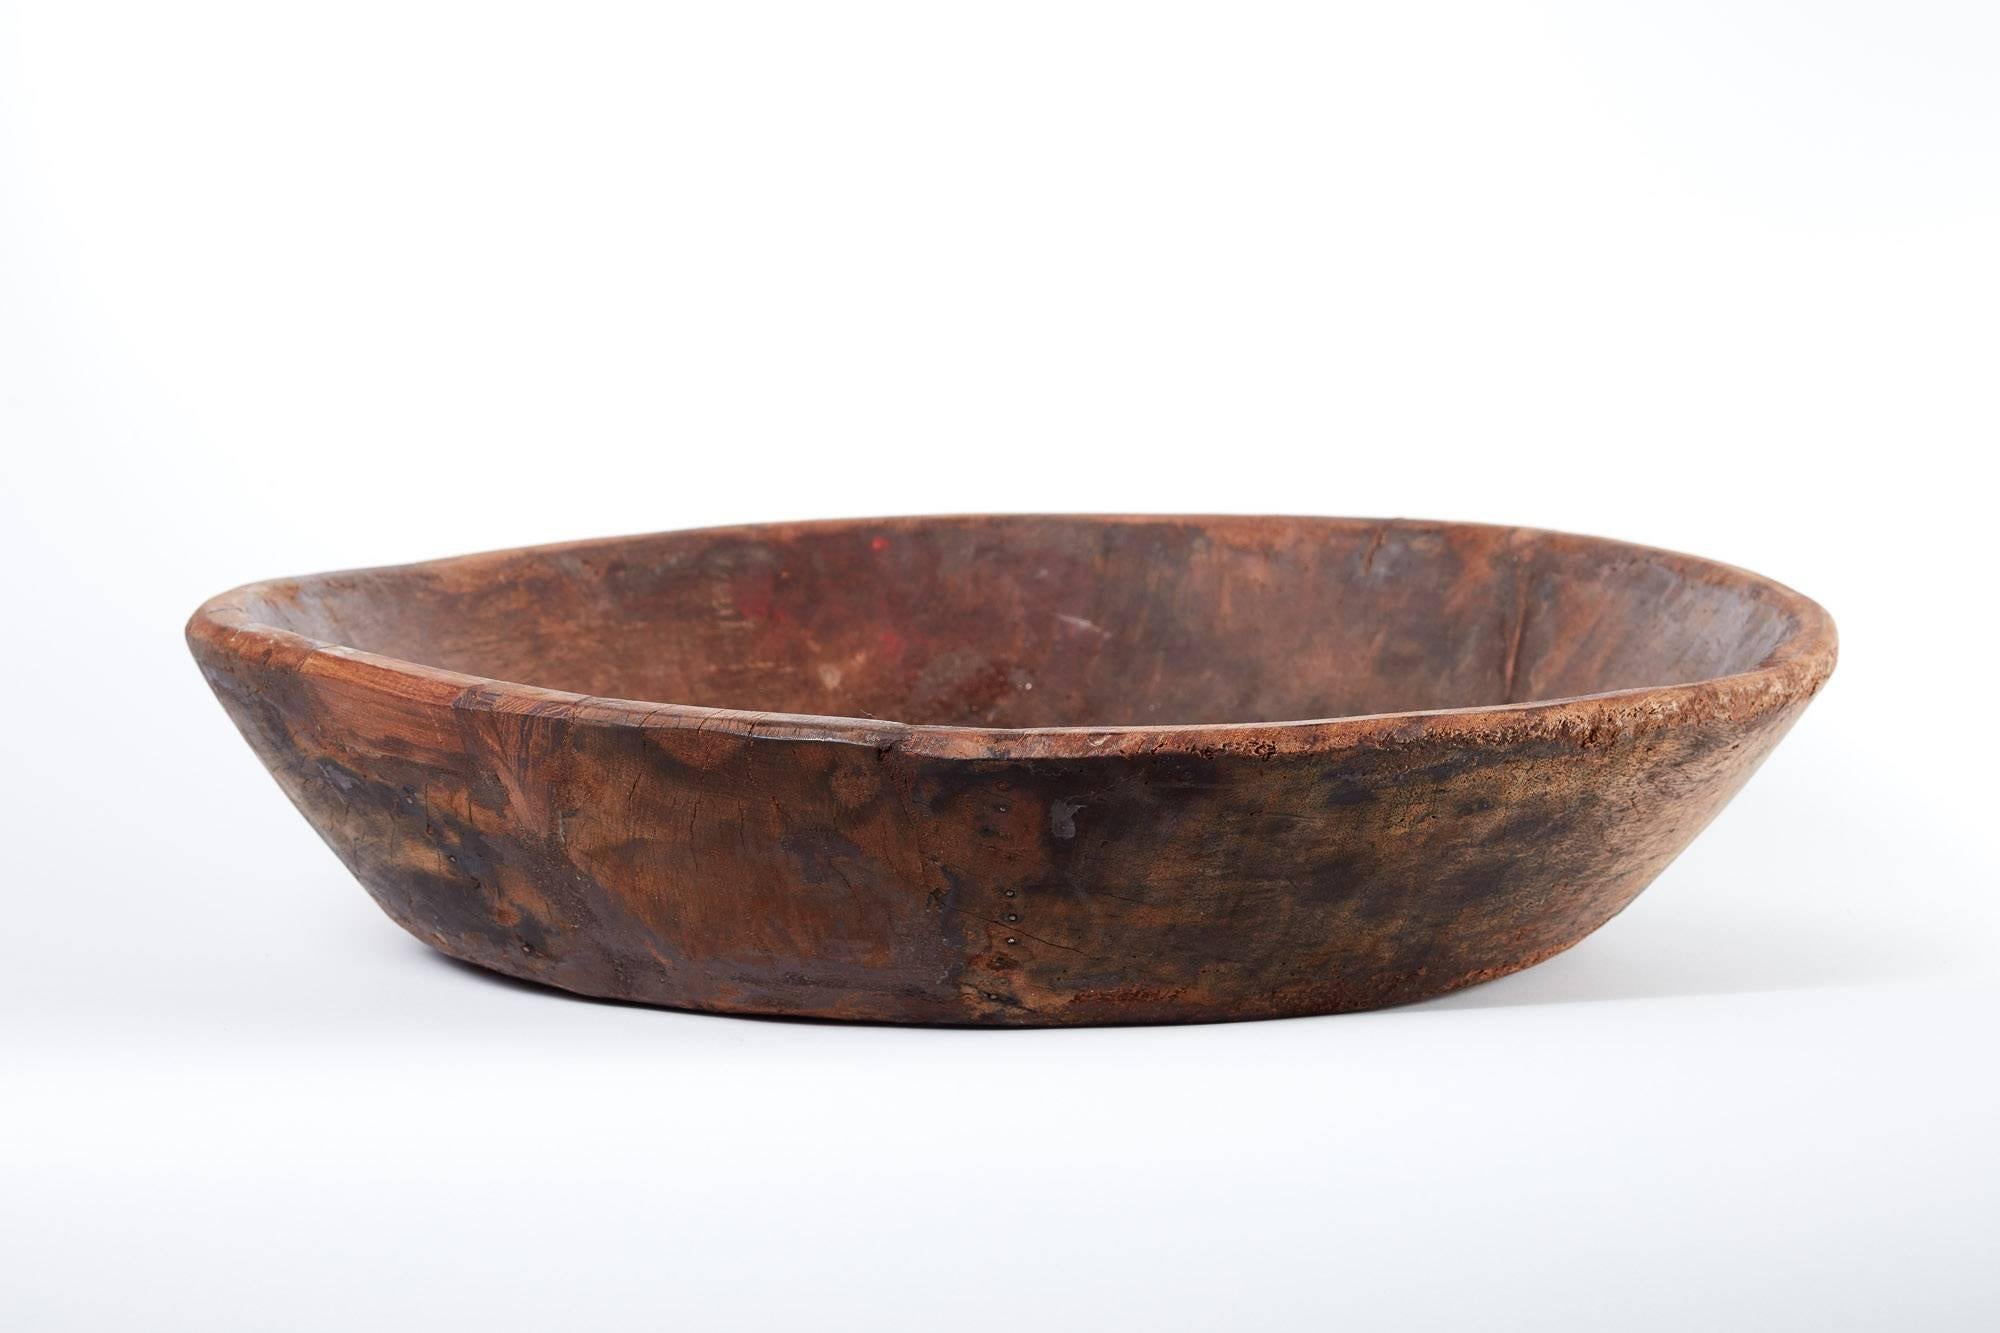 Early 19th century wooden bowl. Handcrafted wood bowl, small nail detail in construction. Rich patina and shallow sides makes this perfect for a centerpiece on a large kitchen island or dining table.